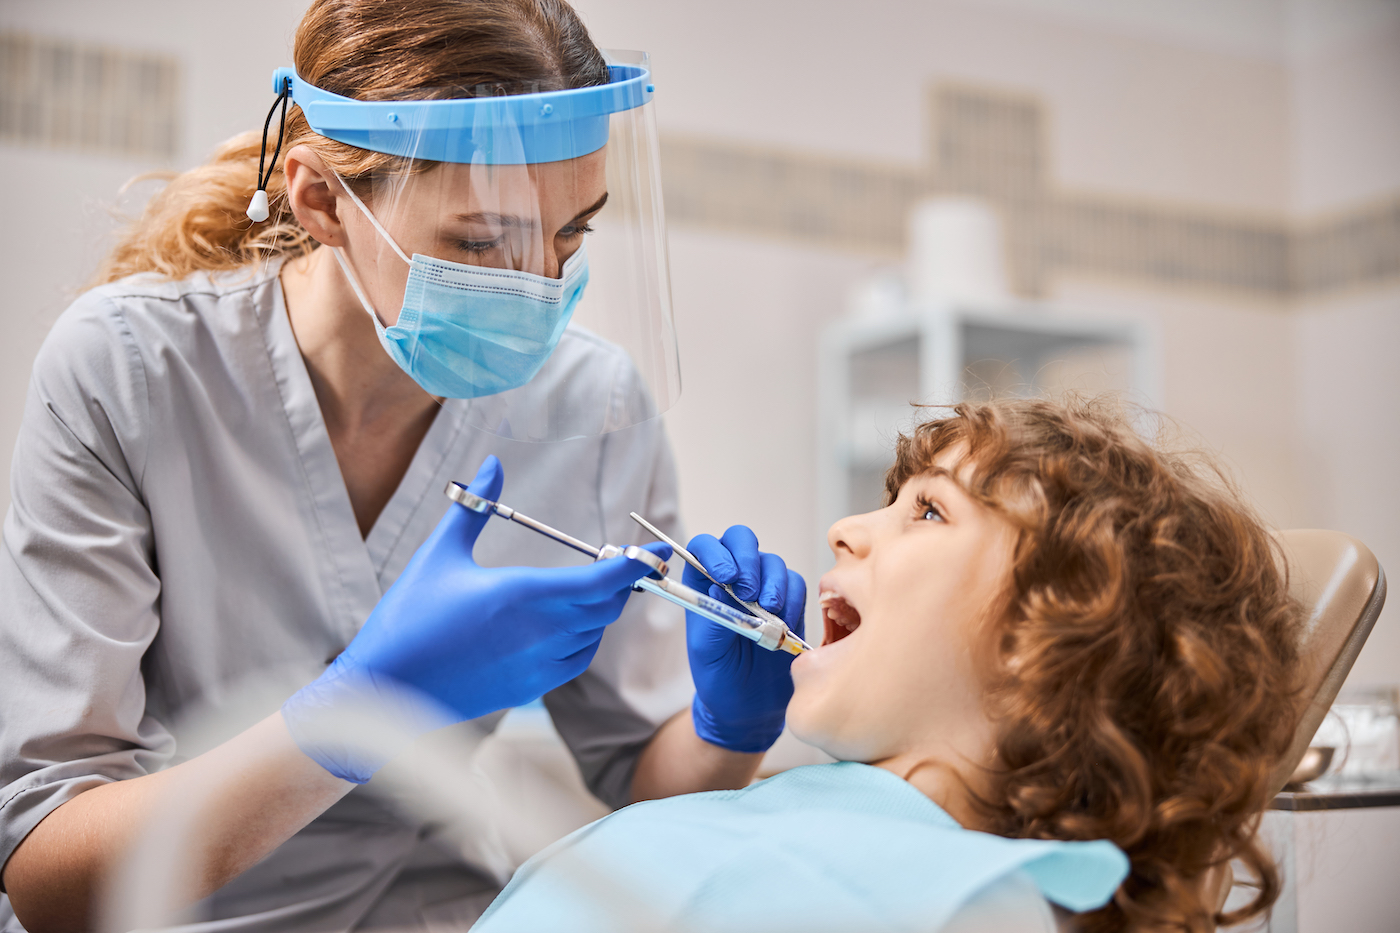 How to take care of your child’s oral health this summer?